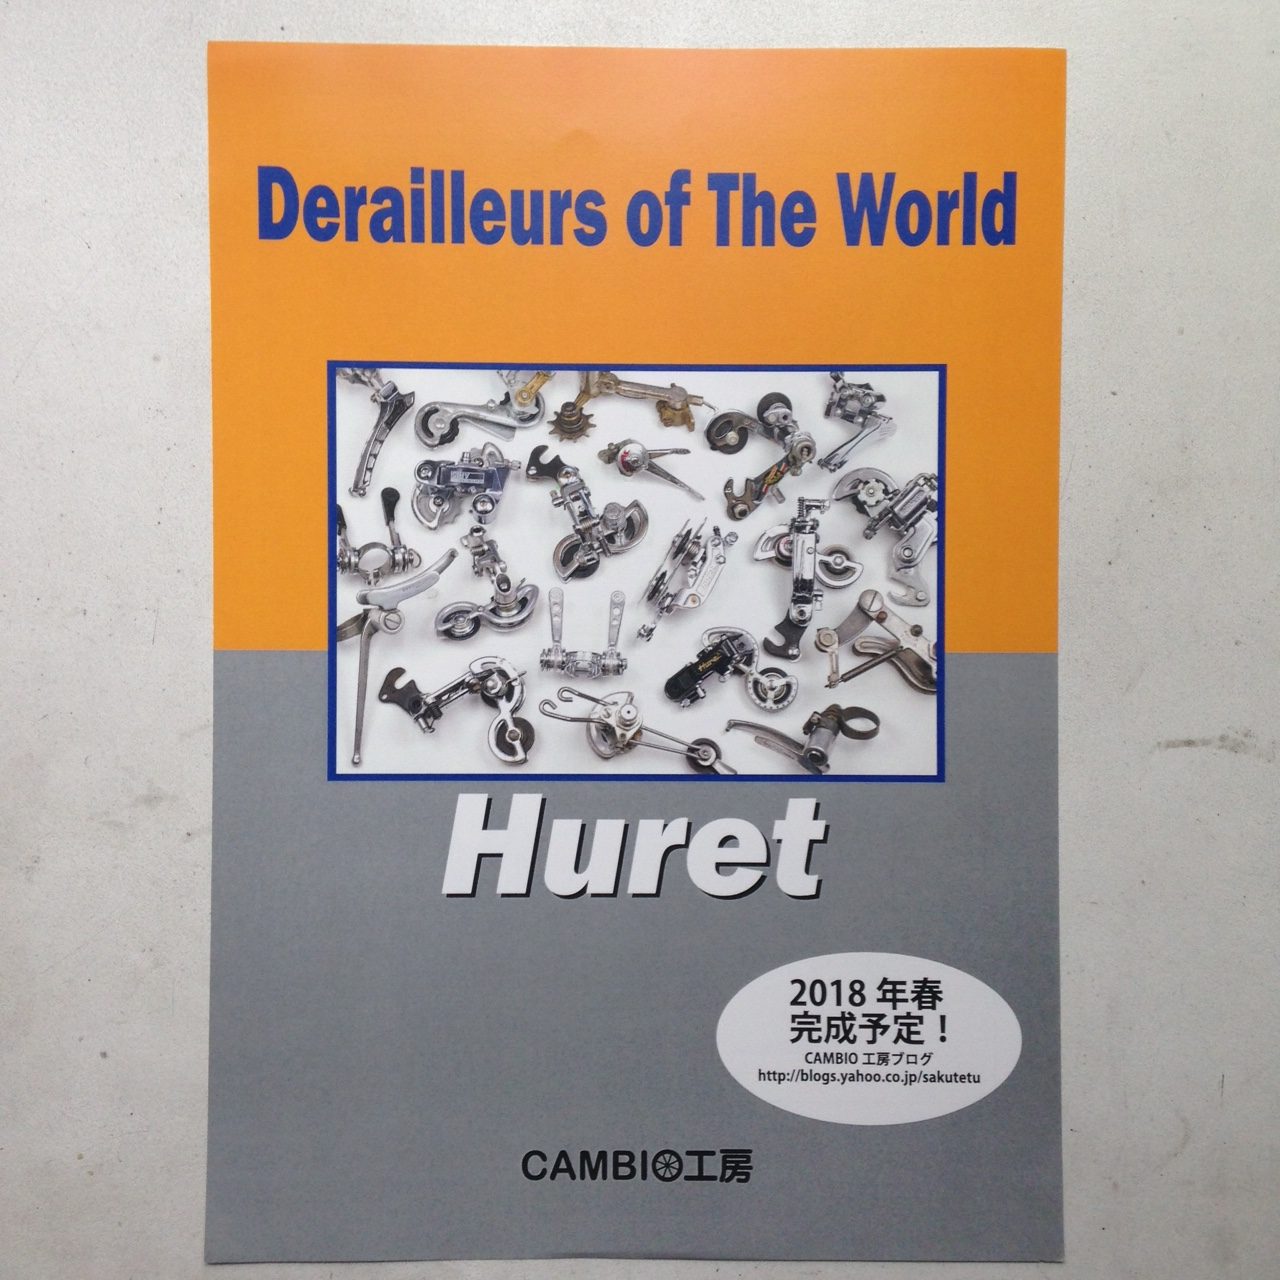 Derailleurs of the World - Huret - planned to be released in spring 2018